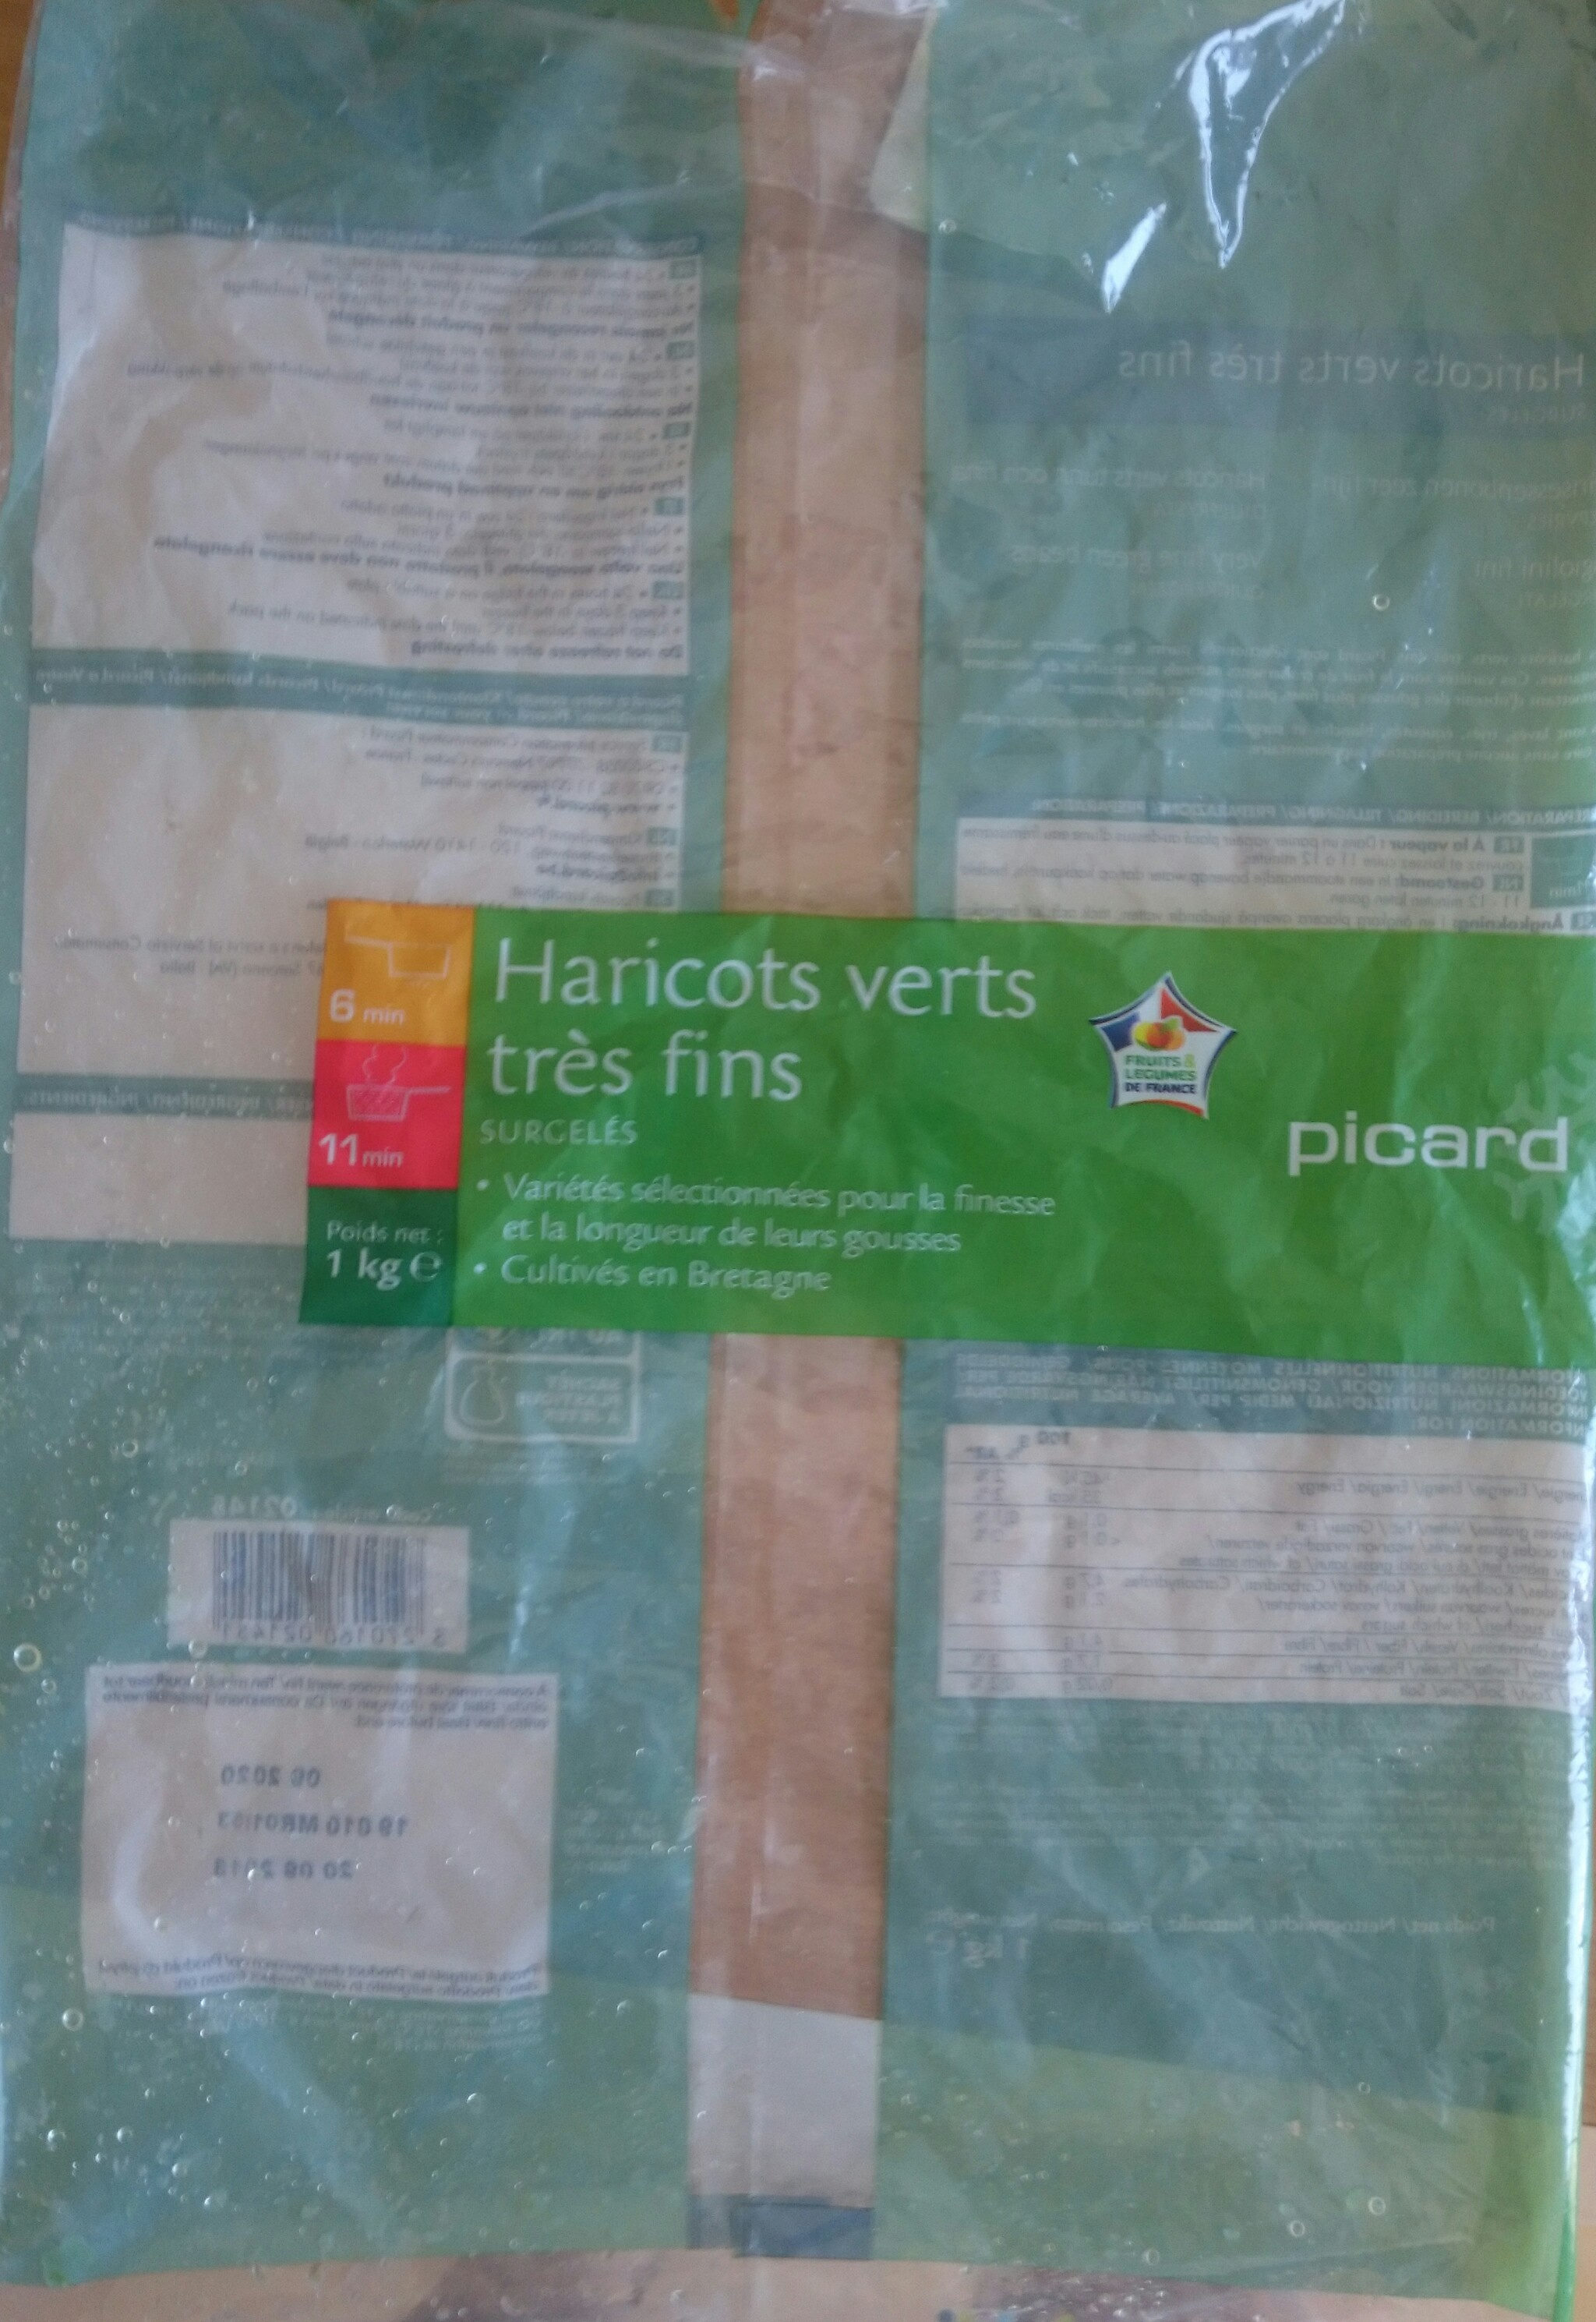 haricots verts tres fin - Product - fr